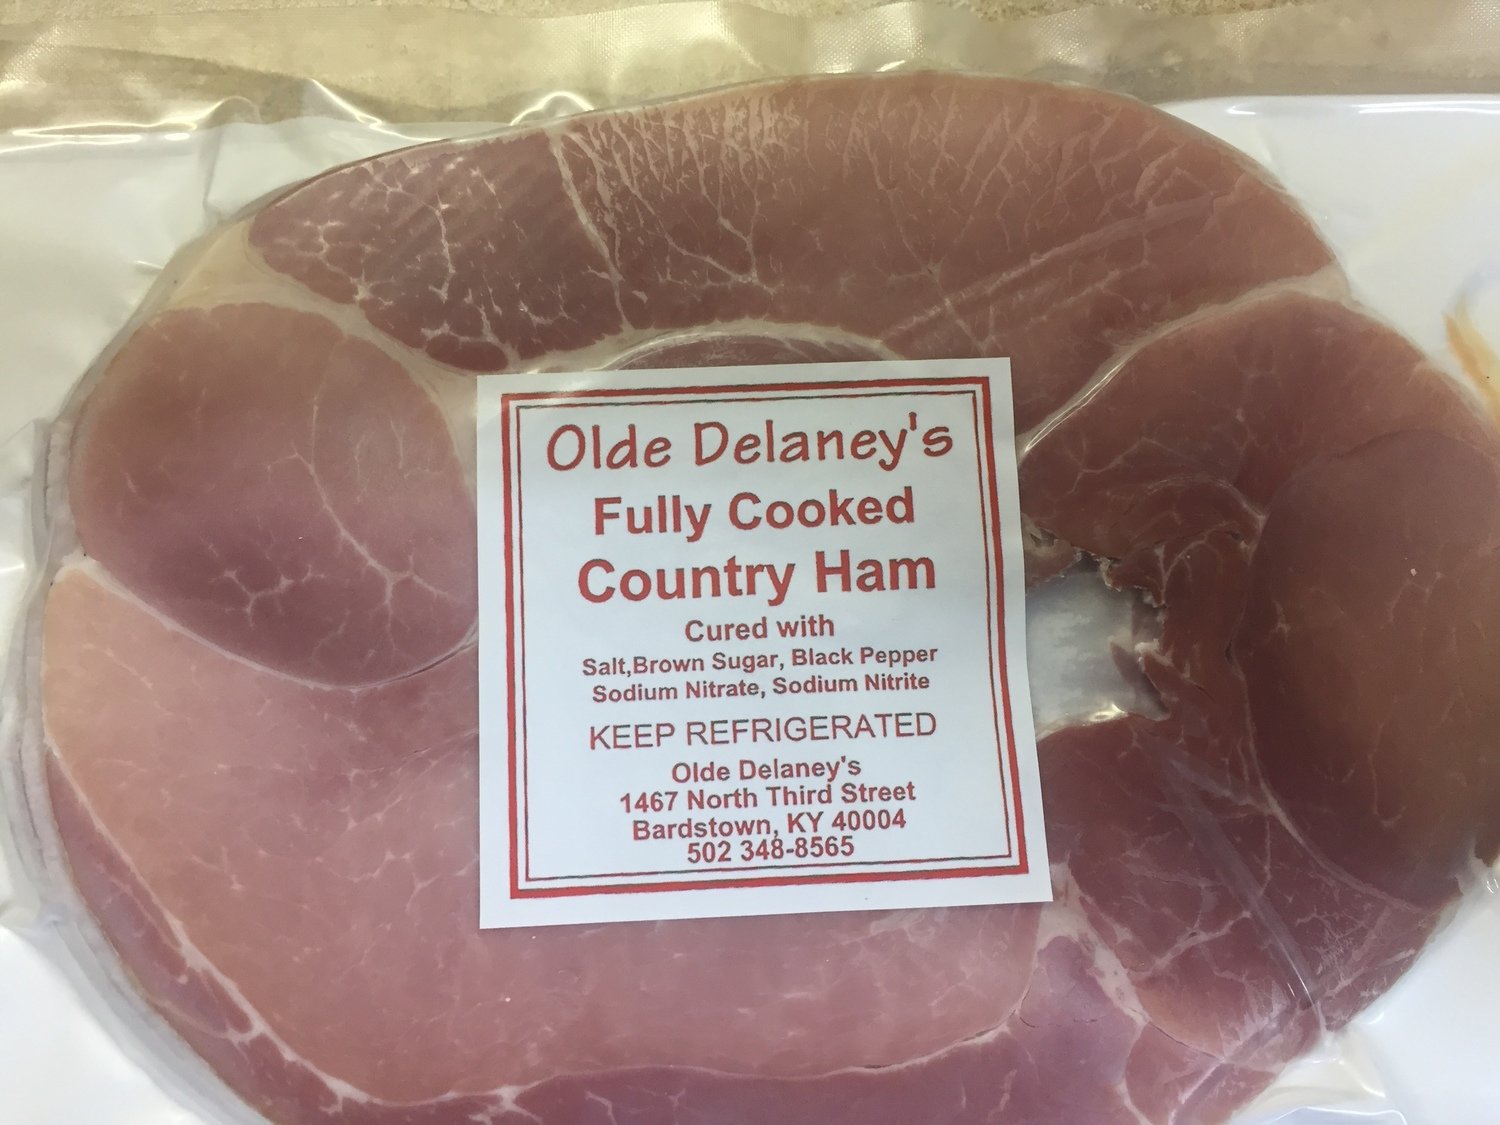 Olde Delaney's Fully Cooked Center Cut Country Ham (6 slices) 16 oz